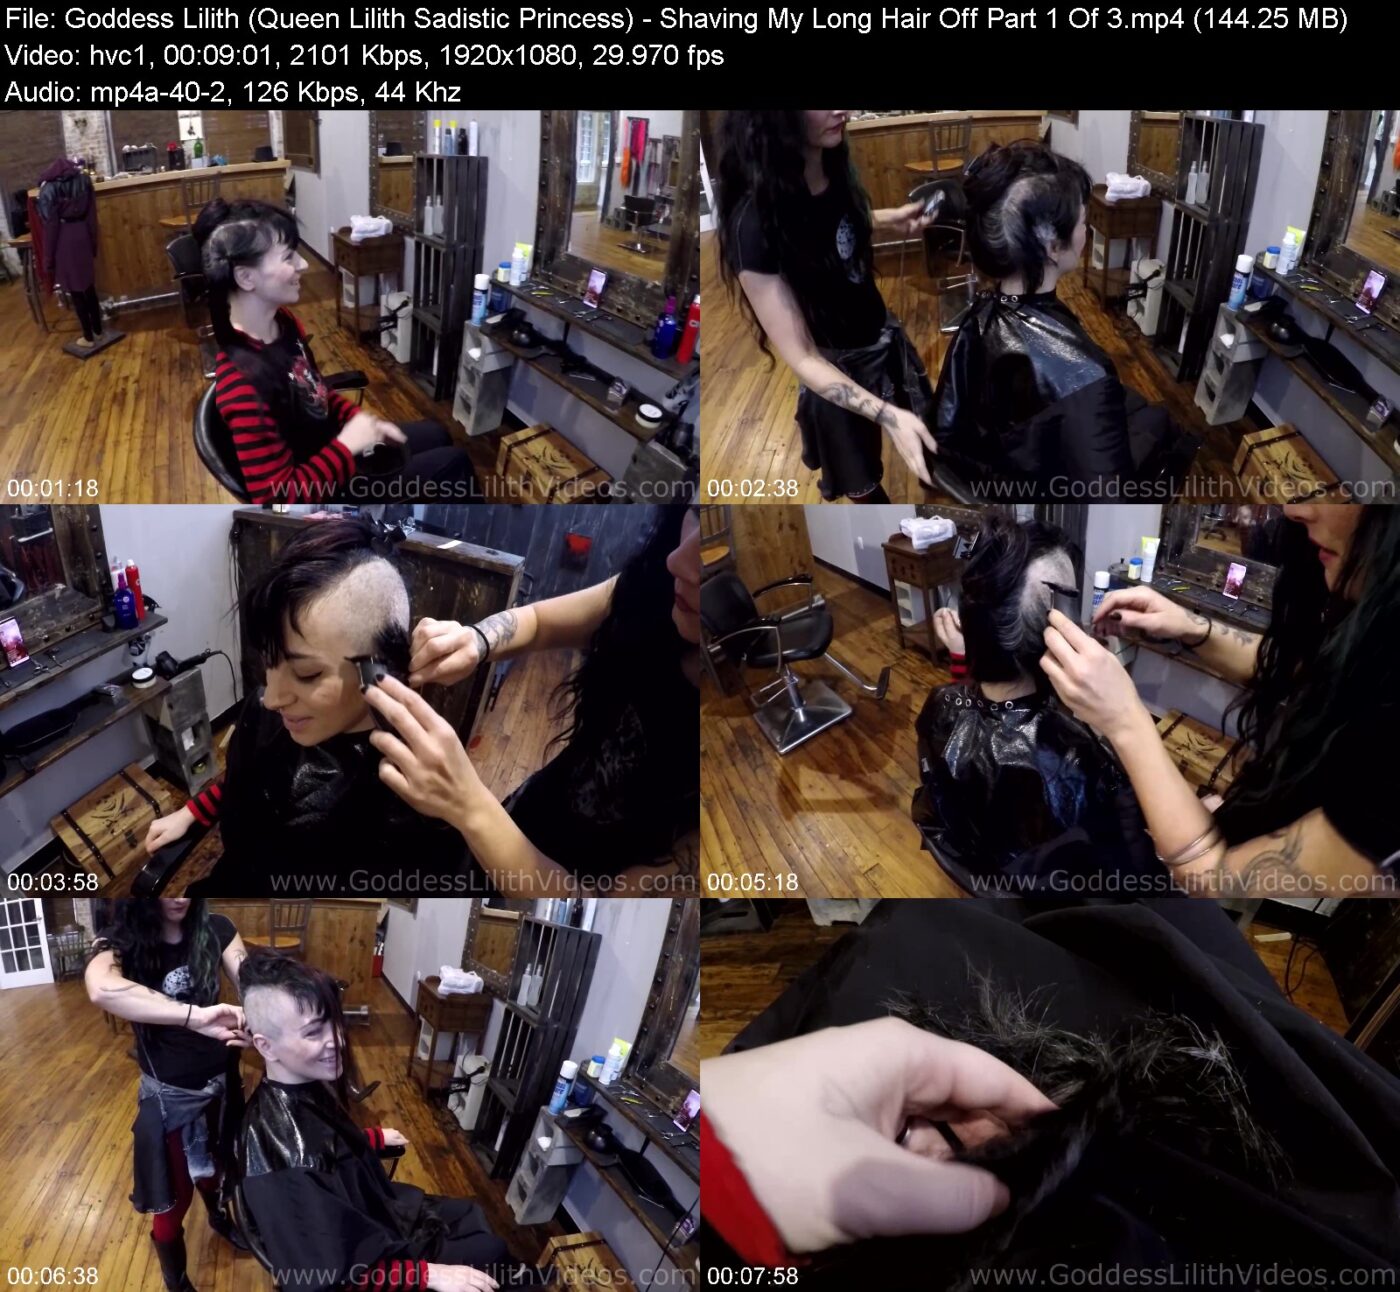 Goddess Lilith (Queen Lilith Sadistic Princess) in Shaving My Long Hair Off Part 1 Of 3